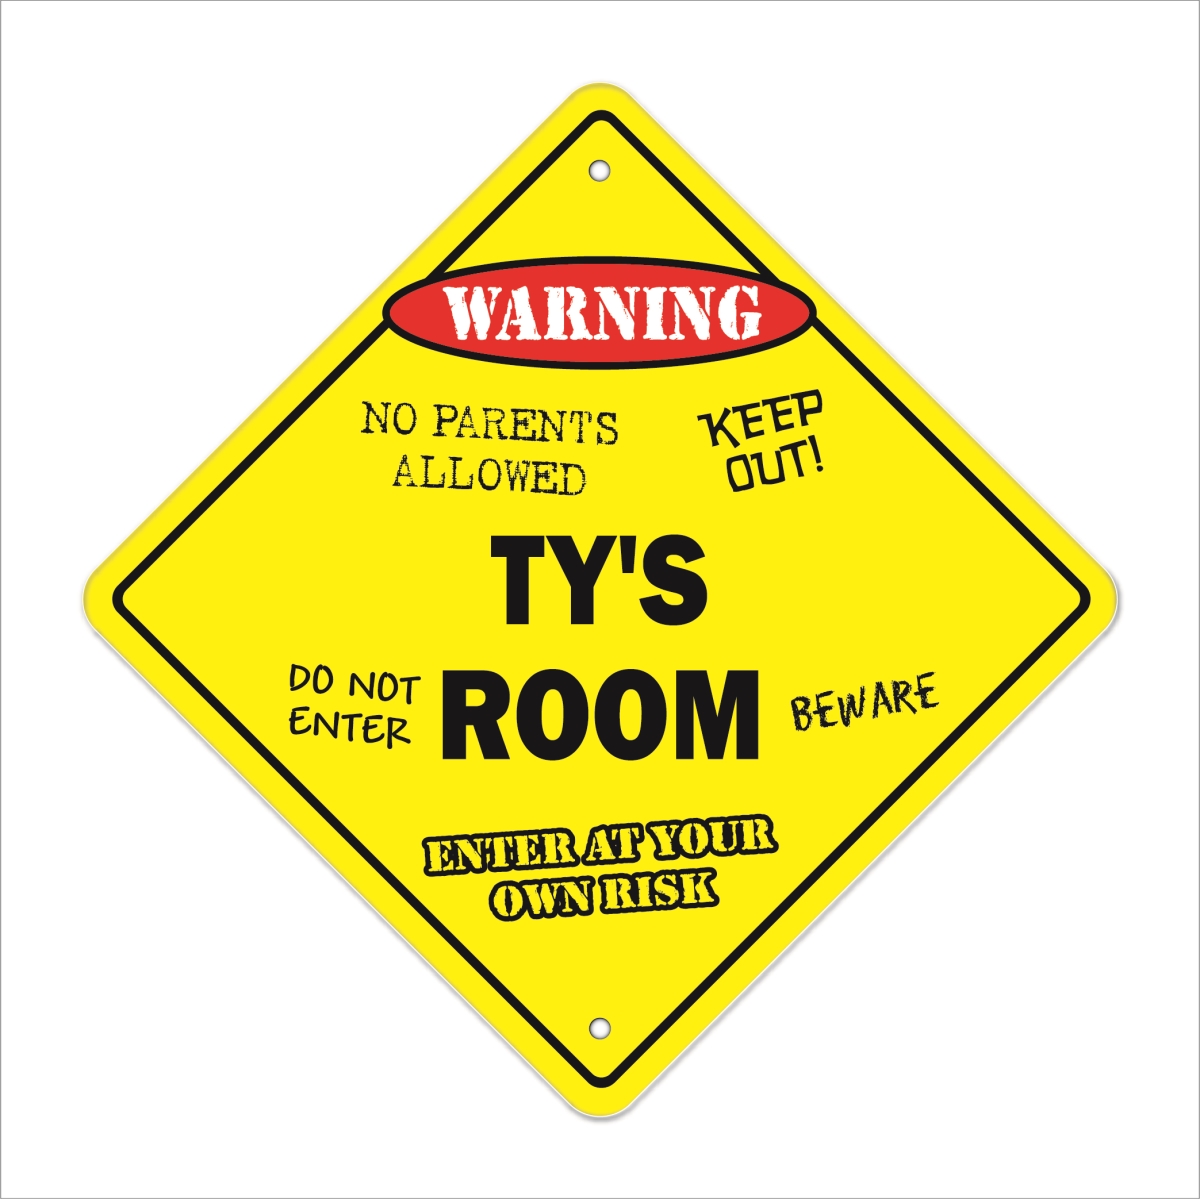 Amistad 12 x 12 in. Crossing Zone Xing Room Sign - Tys